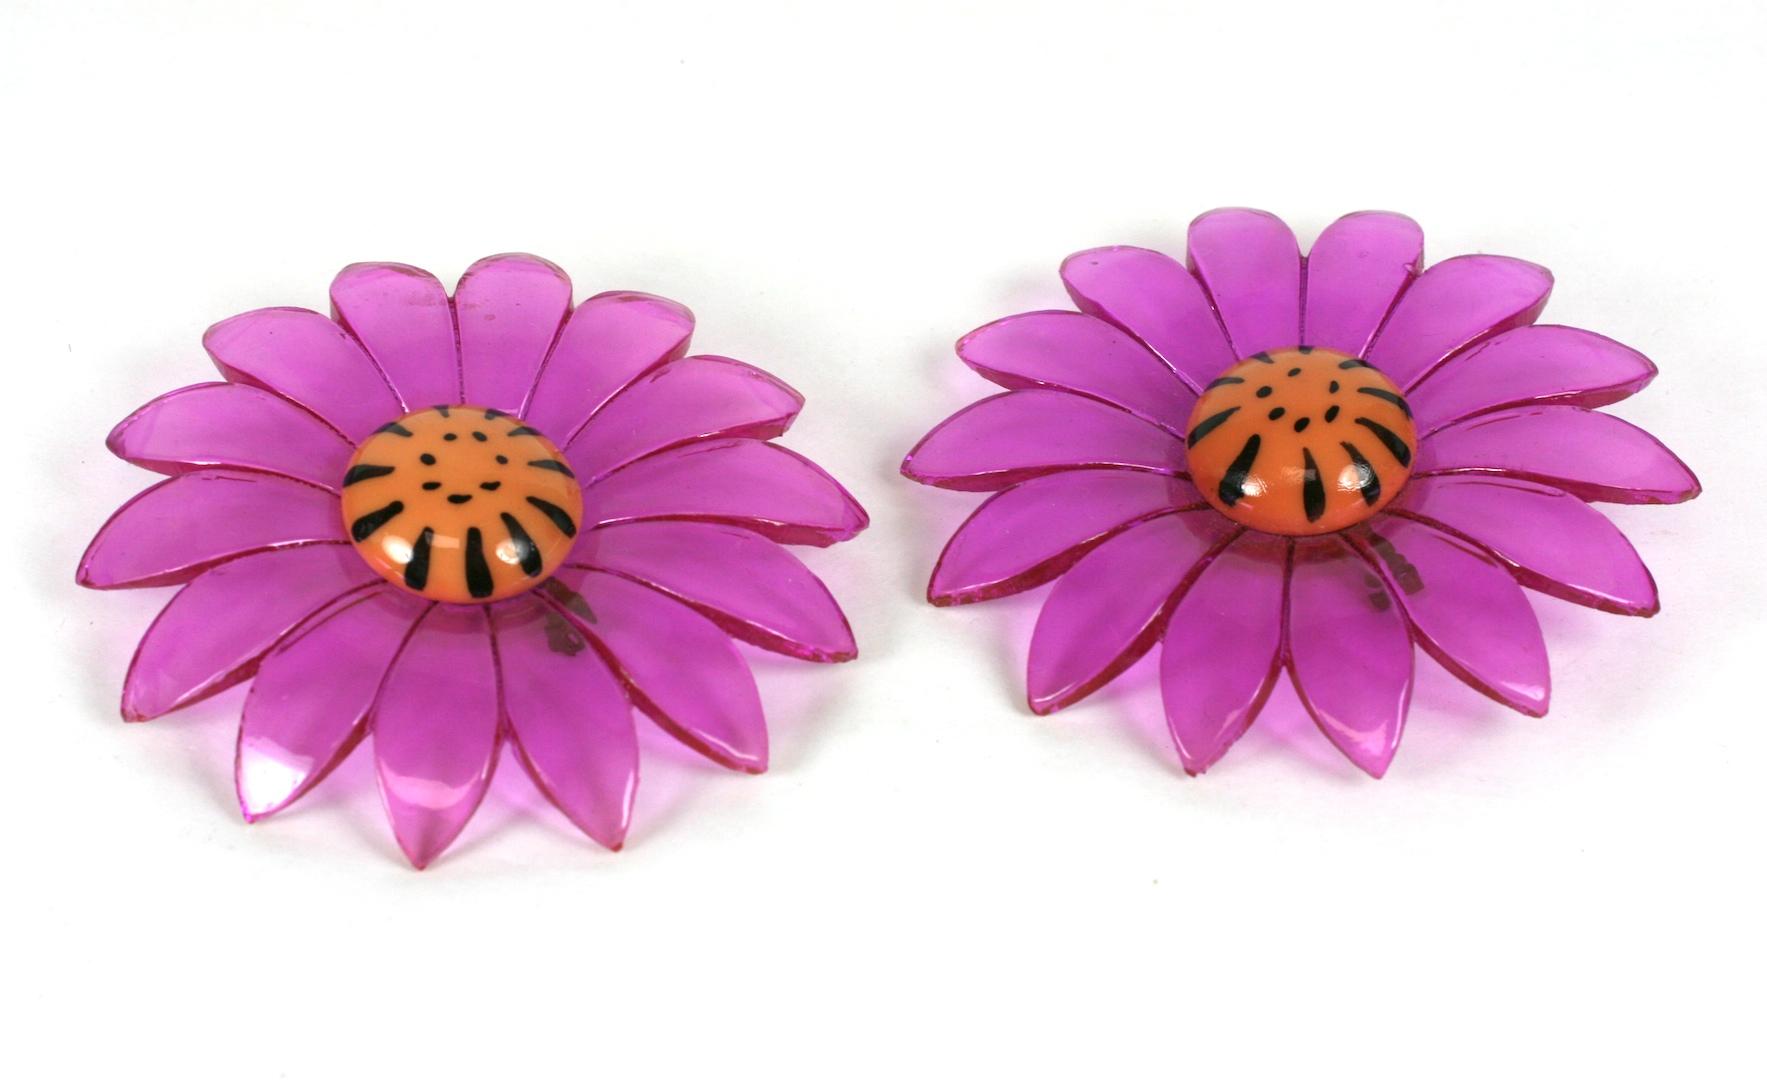 Pair of oversized Mod Lucite Daisy brooches of fuschia pink cut and carved lucite. Flower button centers of orange plastic with hand painted details.
Excellent Condition, 1960's USA.
